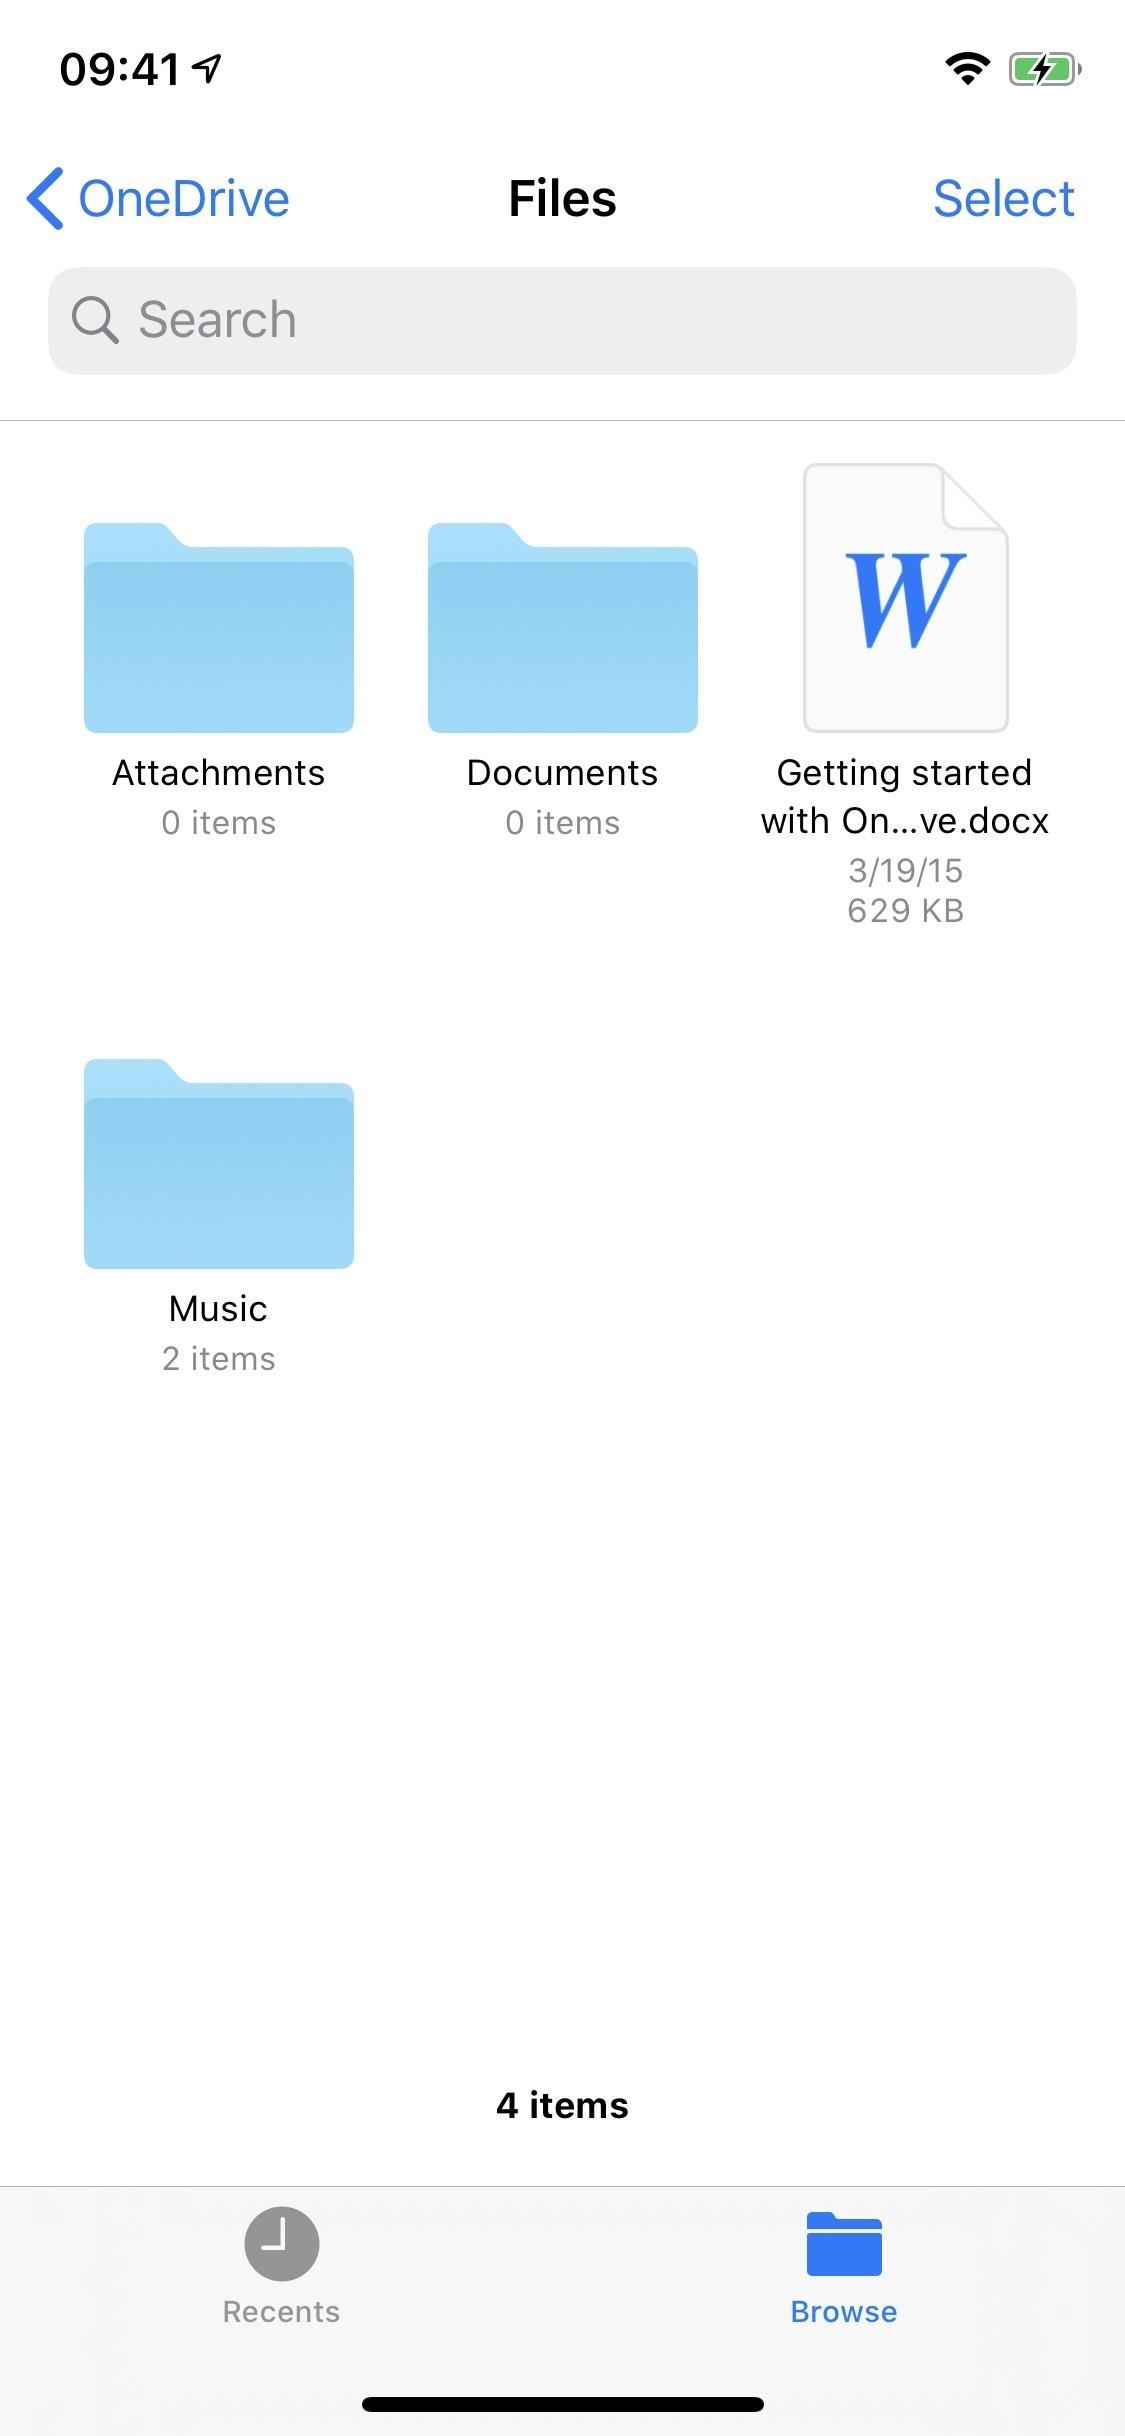 Add Dropbox, Google Drive & Other Cloud Storage Apps to Files on Your iPhone (& Manage All Your Docs from One Place)